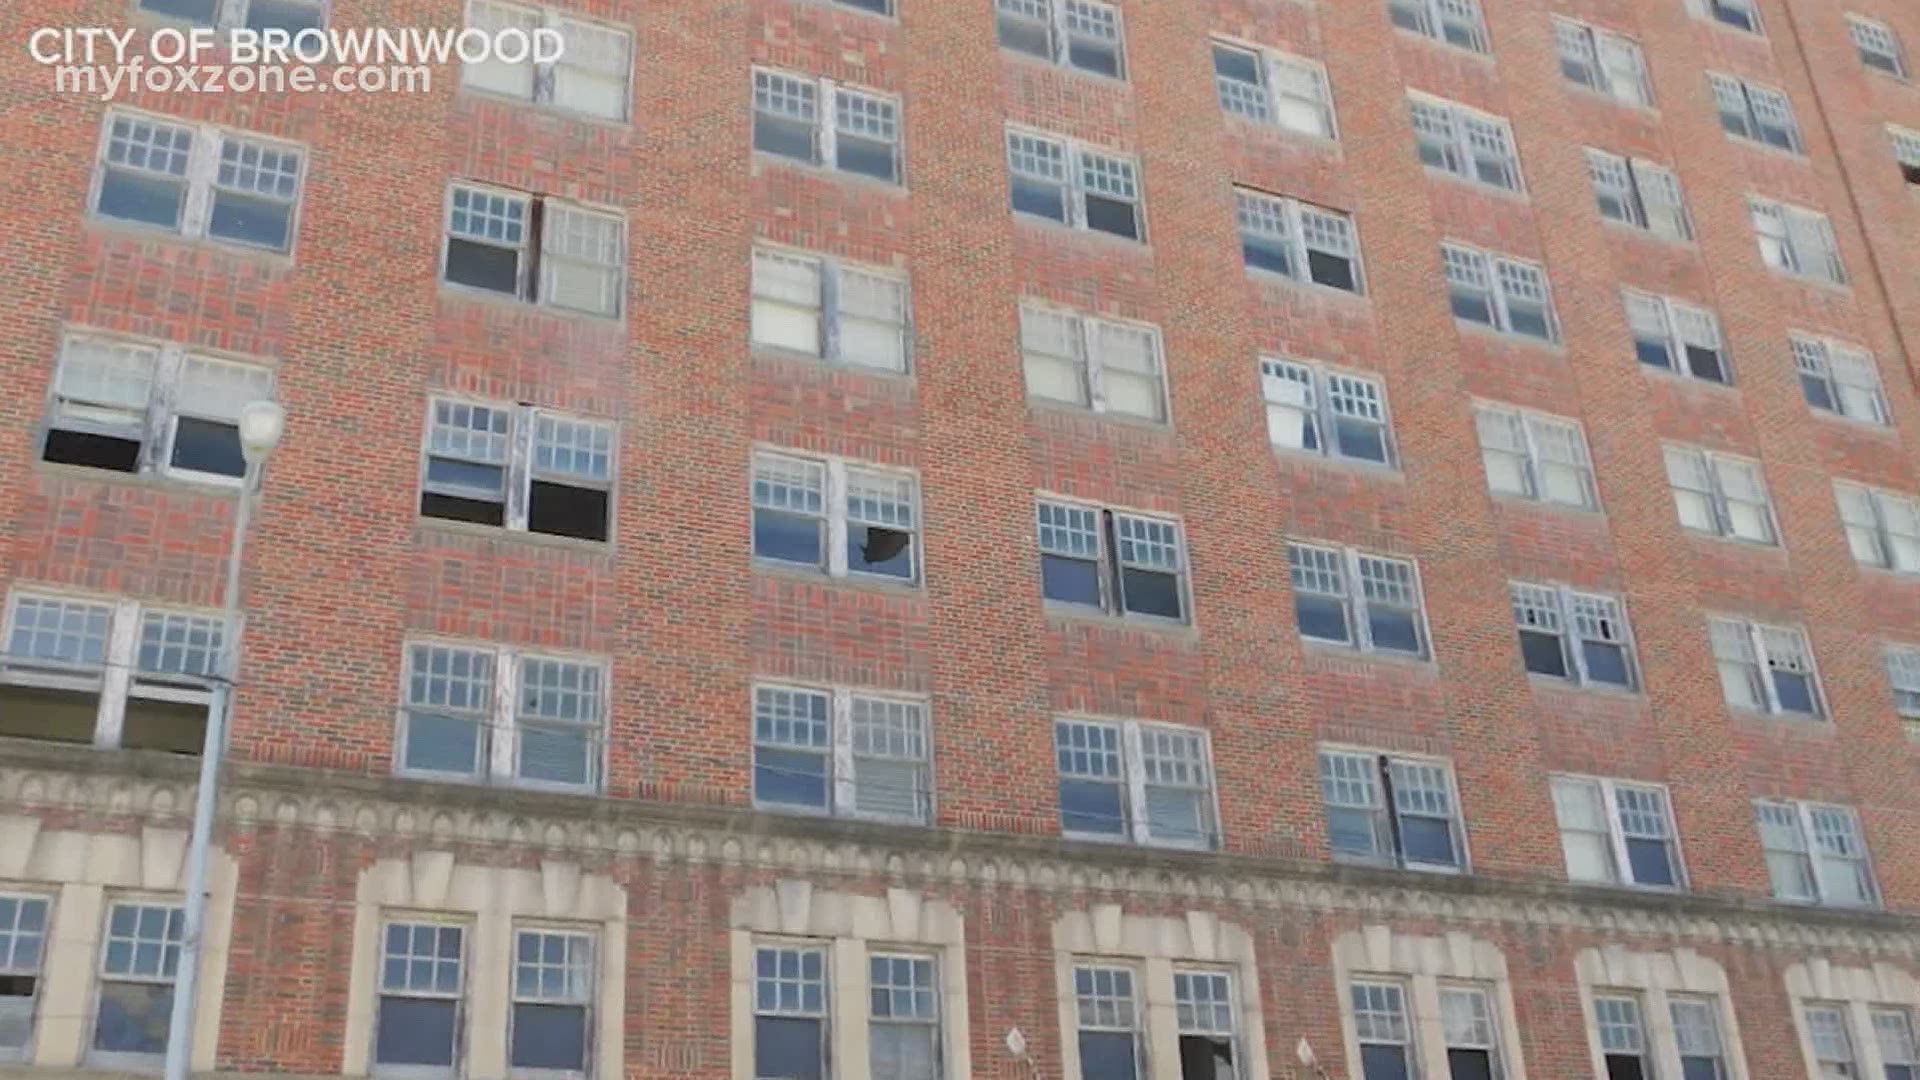 The old Brownwood Hotel is a 12-story eyesore right in the middle of downtown. The restoration project is estimated to take five years.